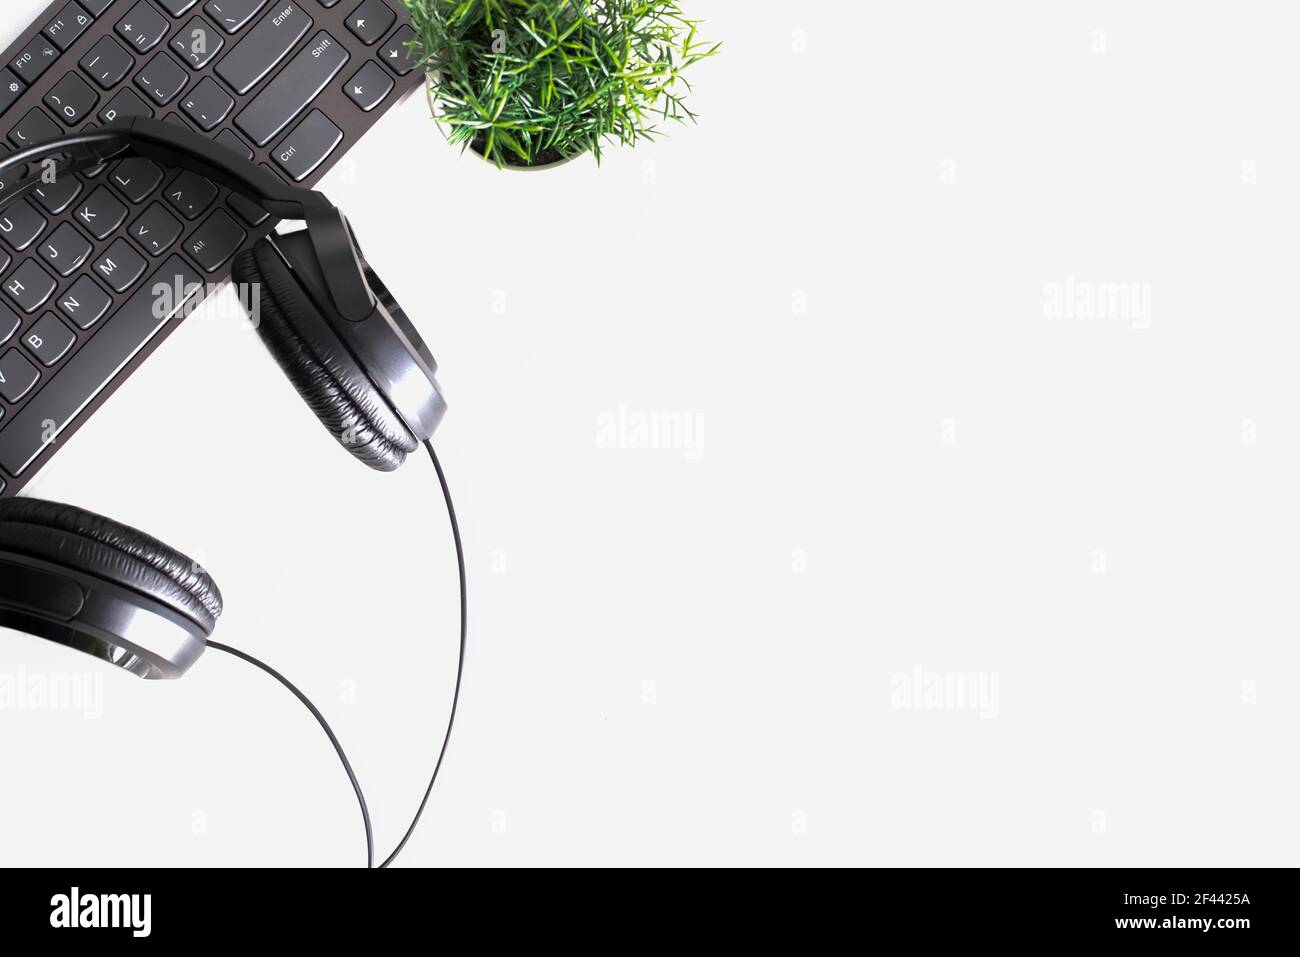 Business work place with laptop, keyboard, headphones and plant Stock Photo